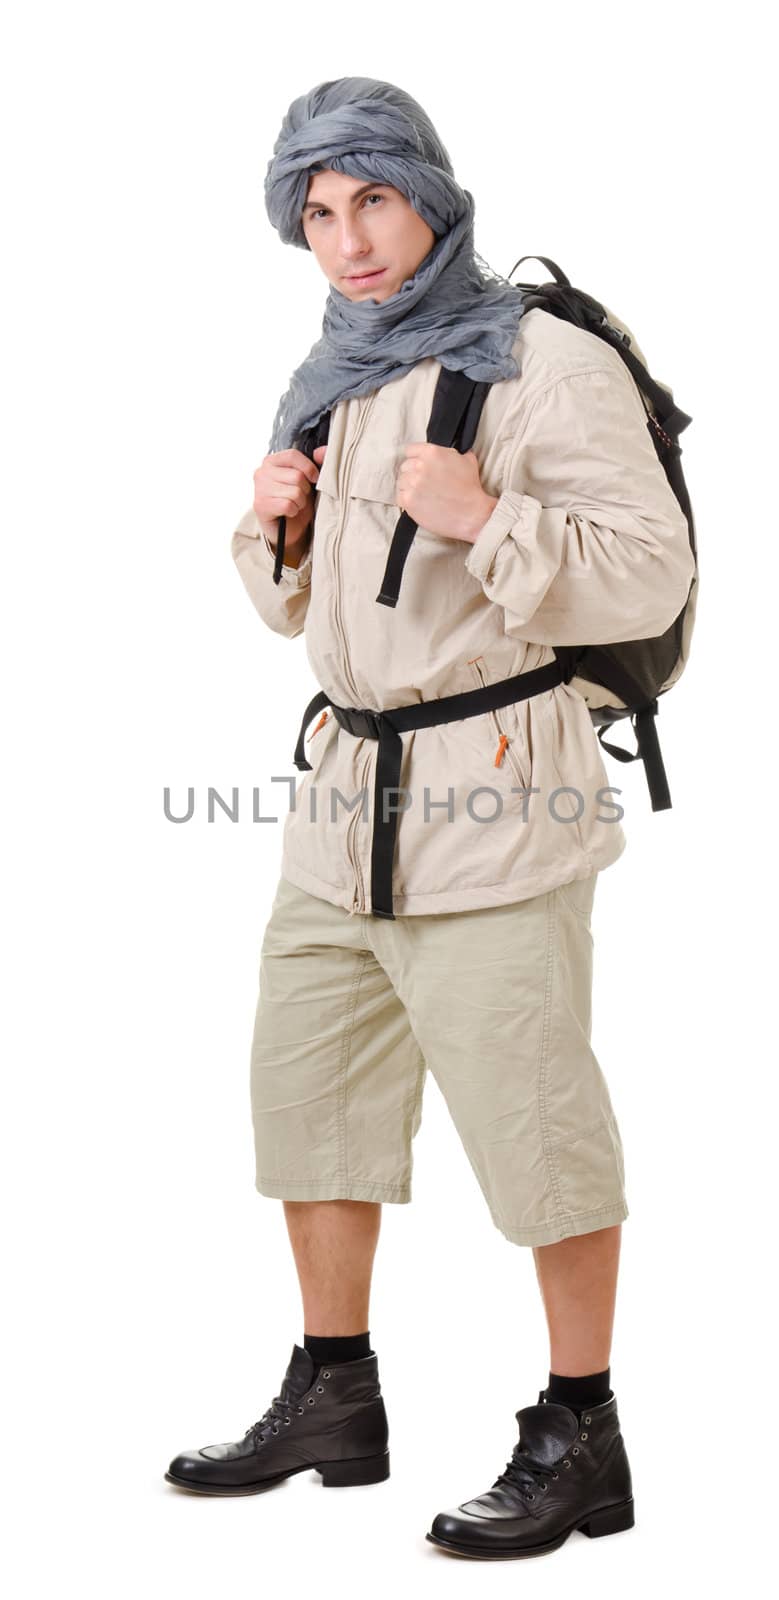 wildman - tourist with backpack on a white background